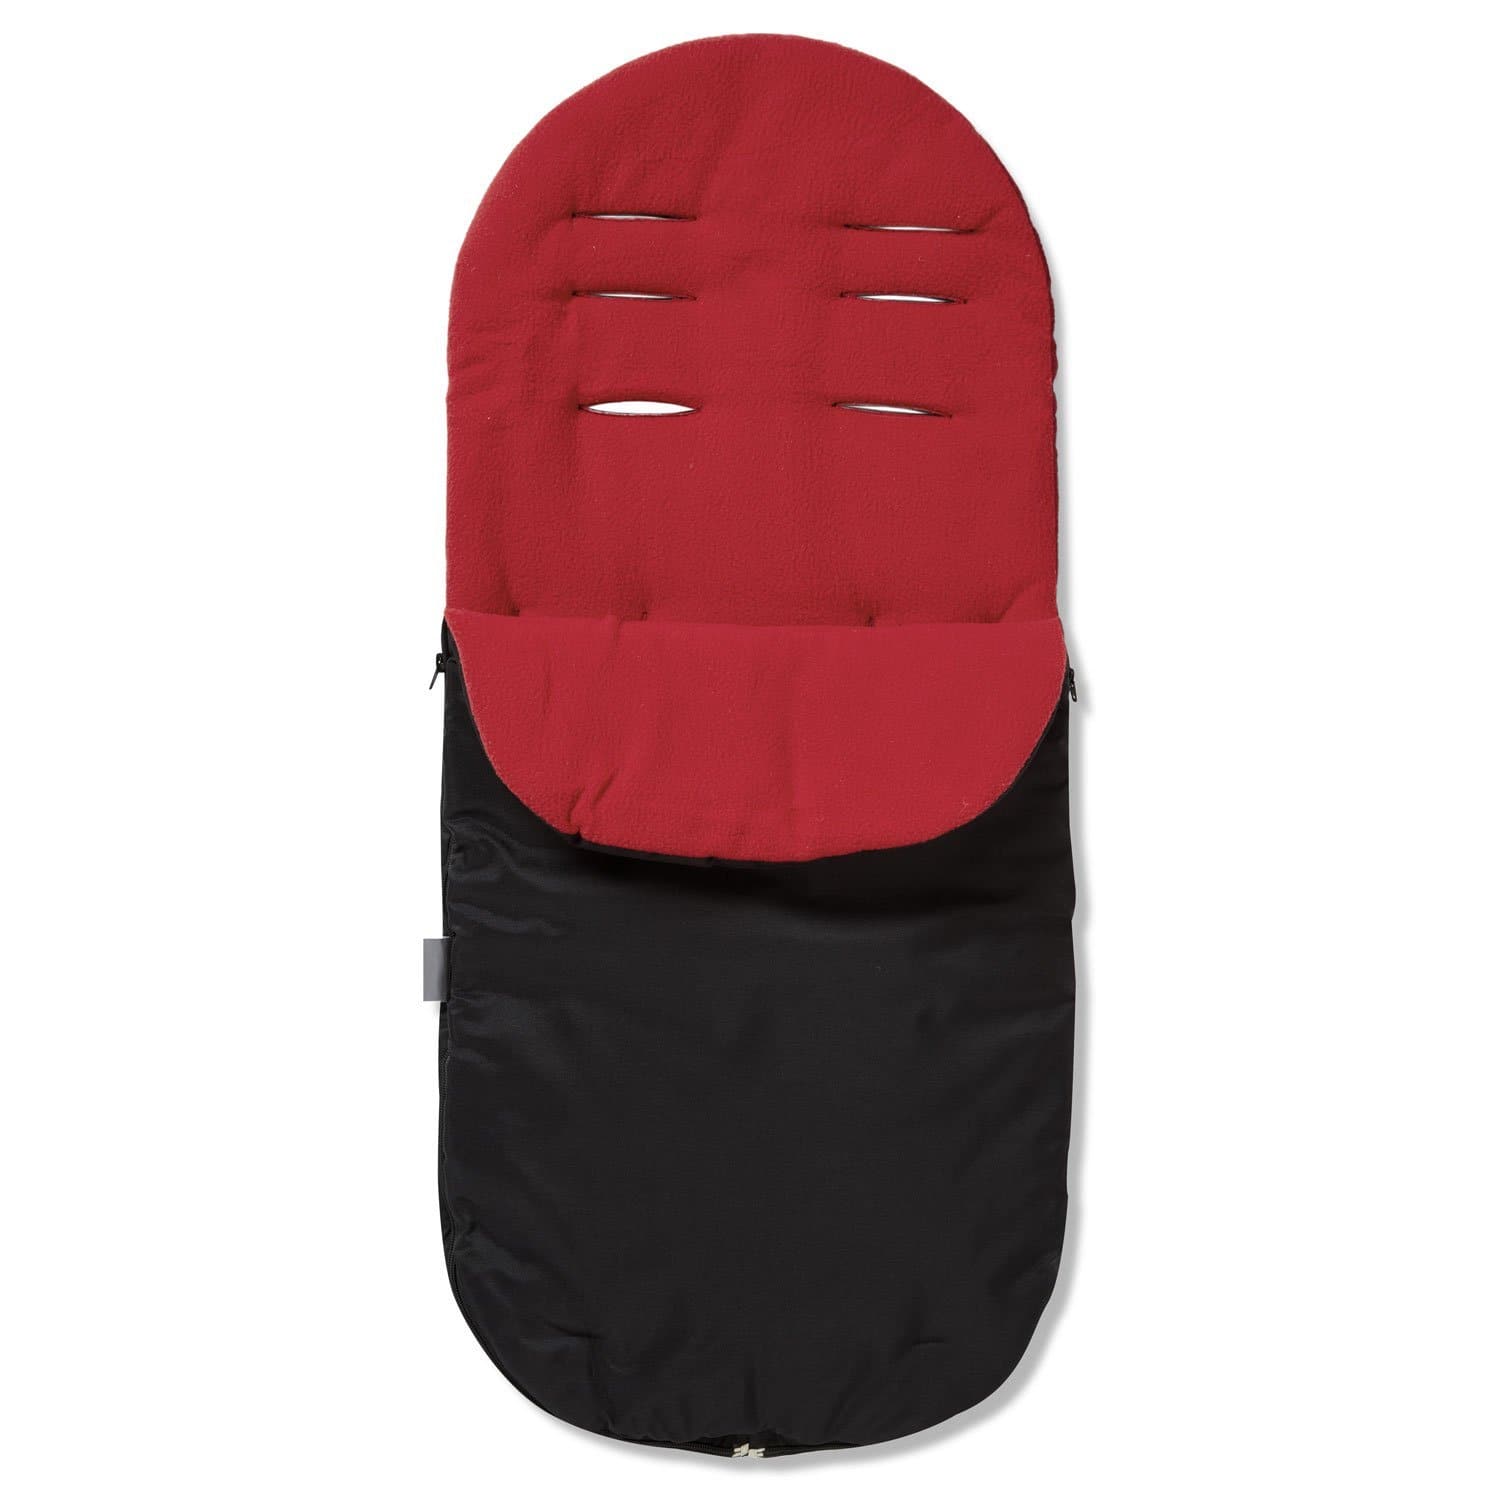 Footmuff / Cosy Toes Compatible with BabiesRus - Red / Fits All Models | For Your Little One